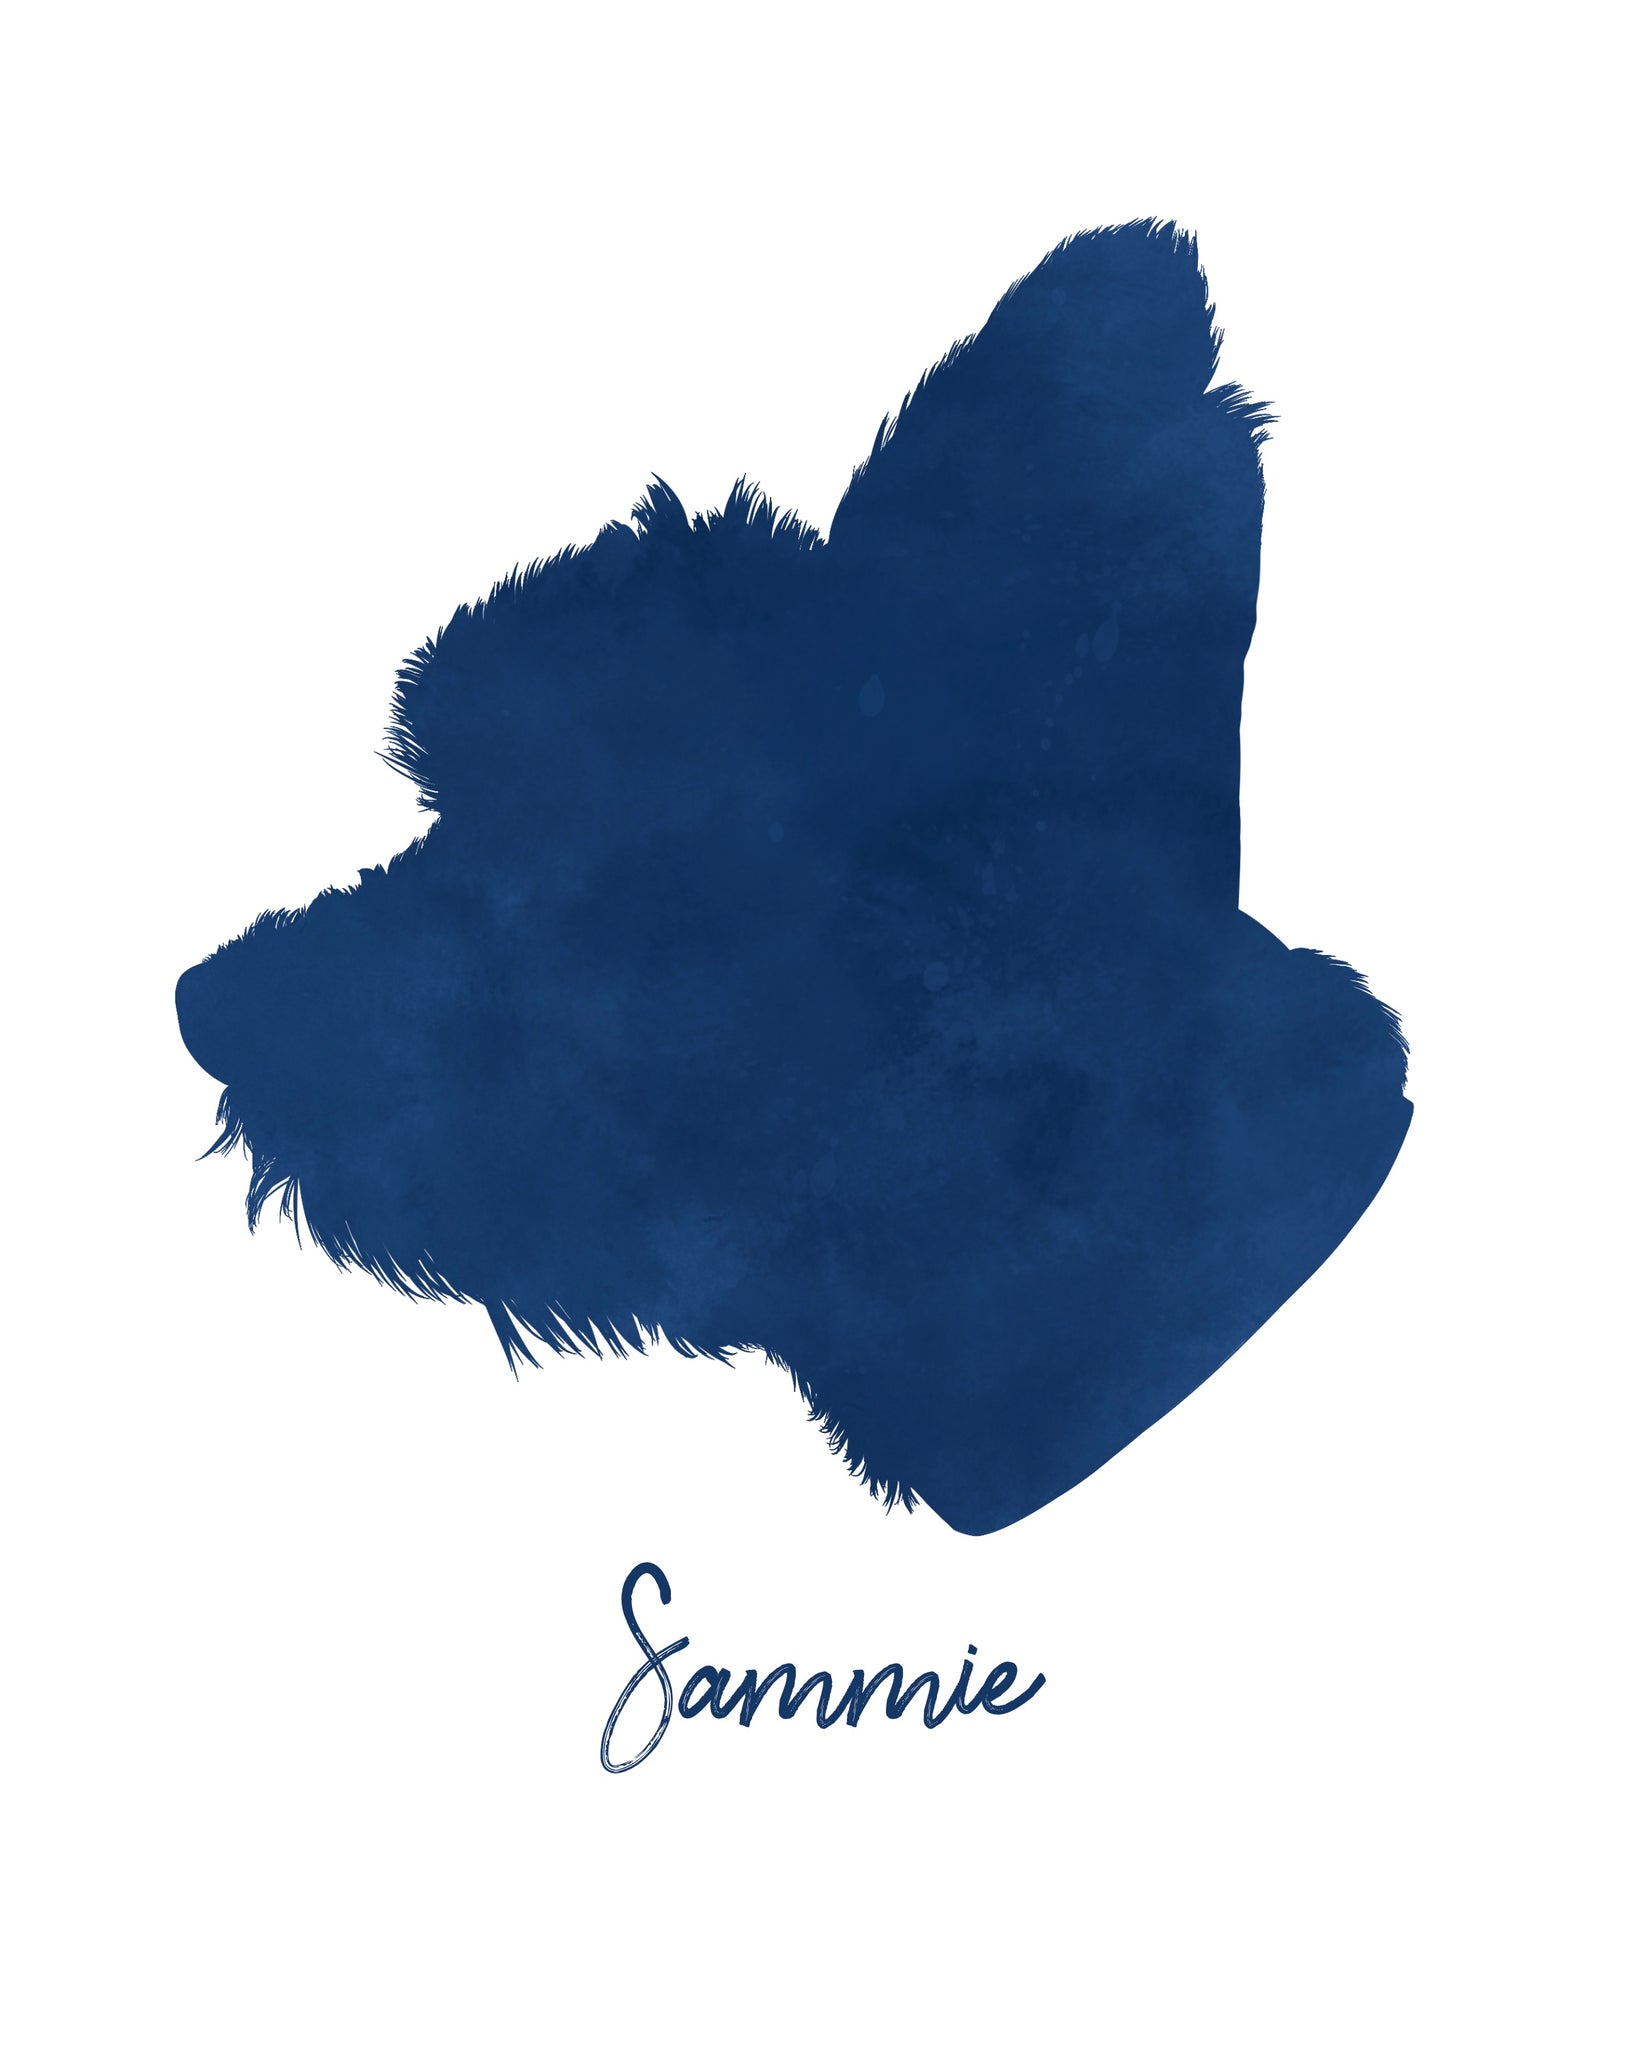 Pet silhouette in a navy watercolor effect